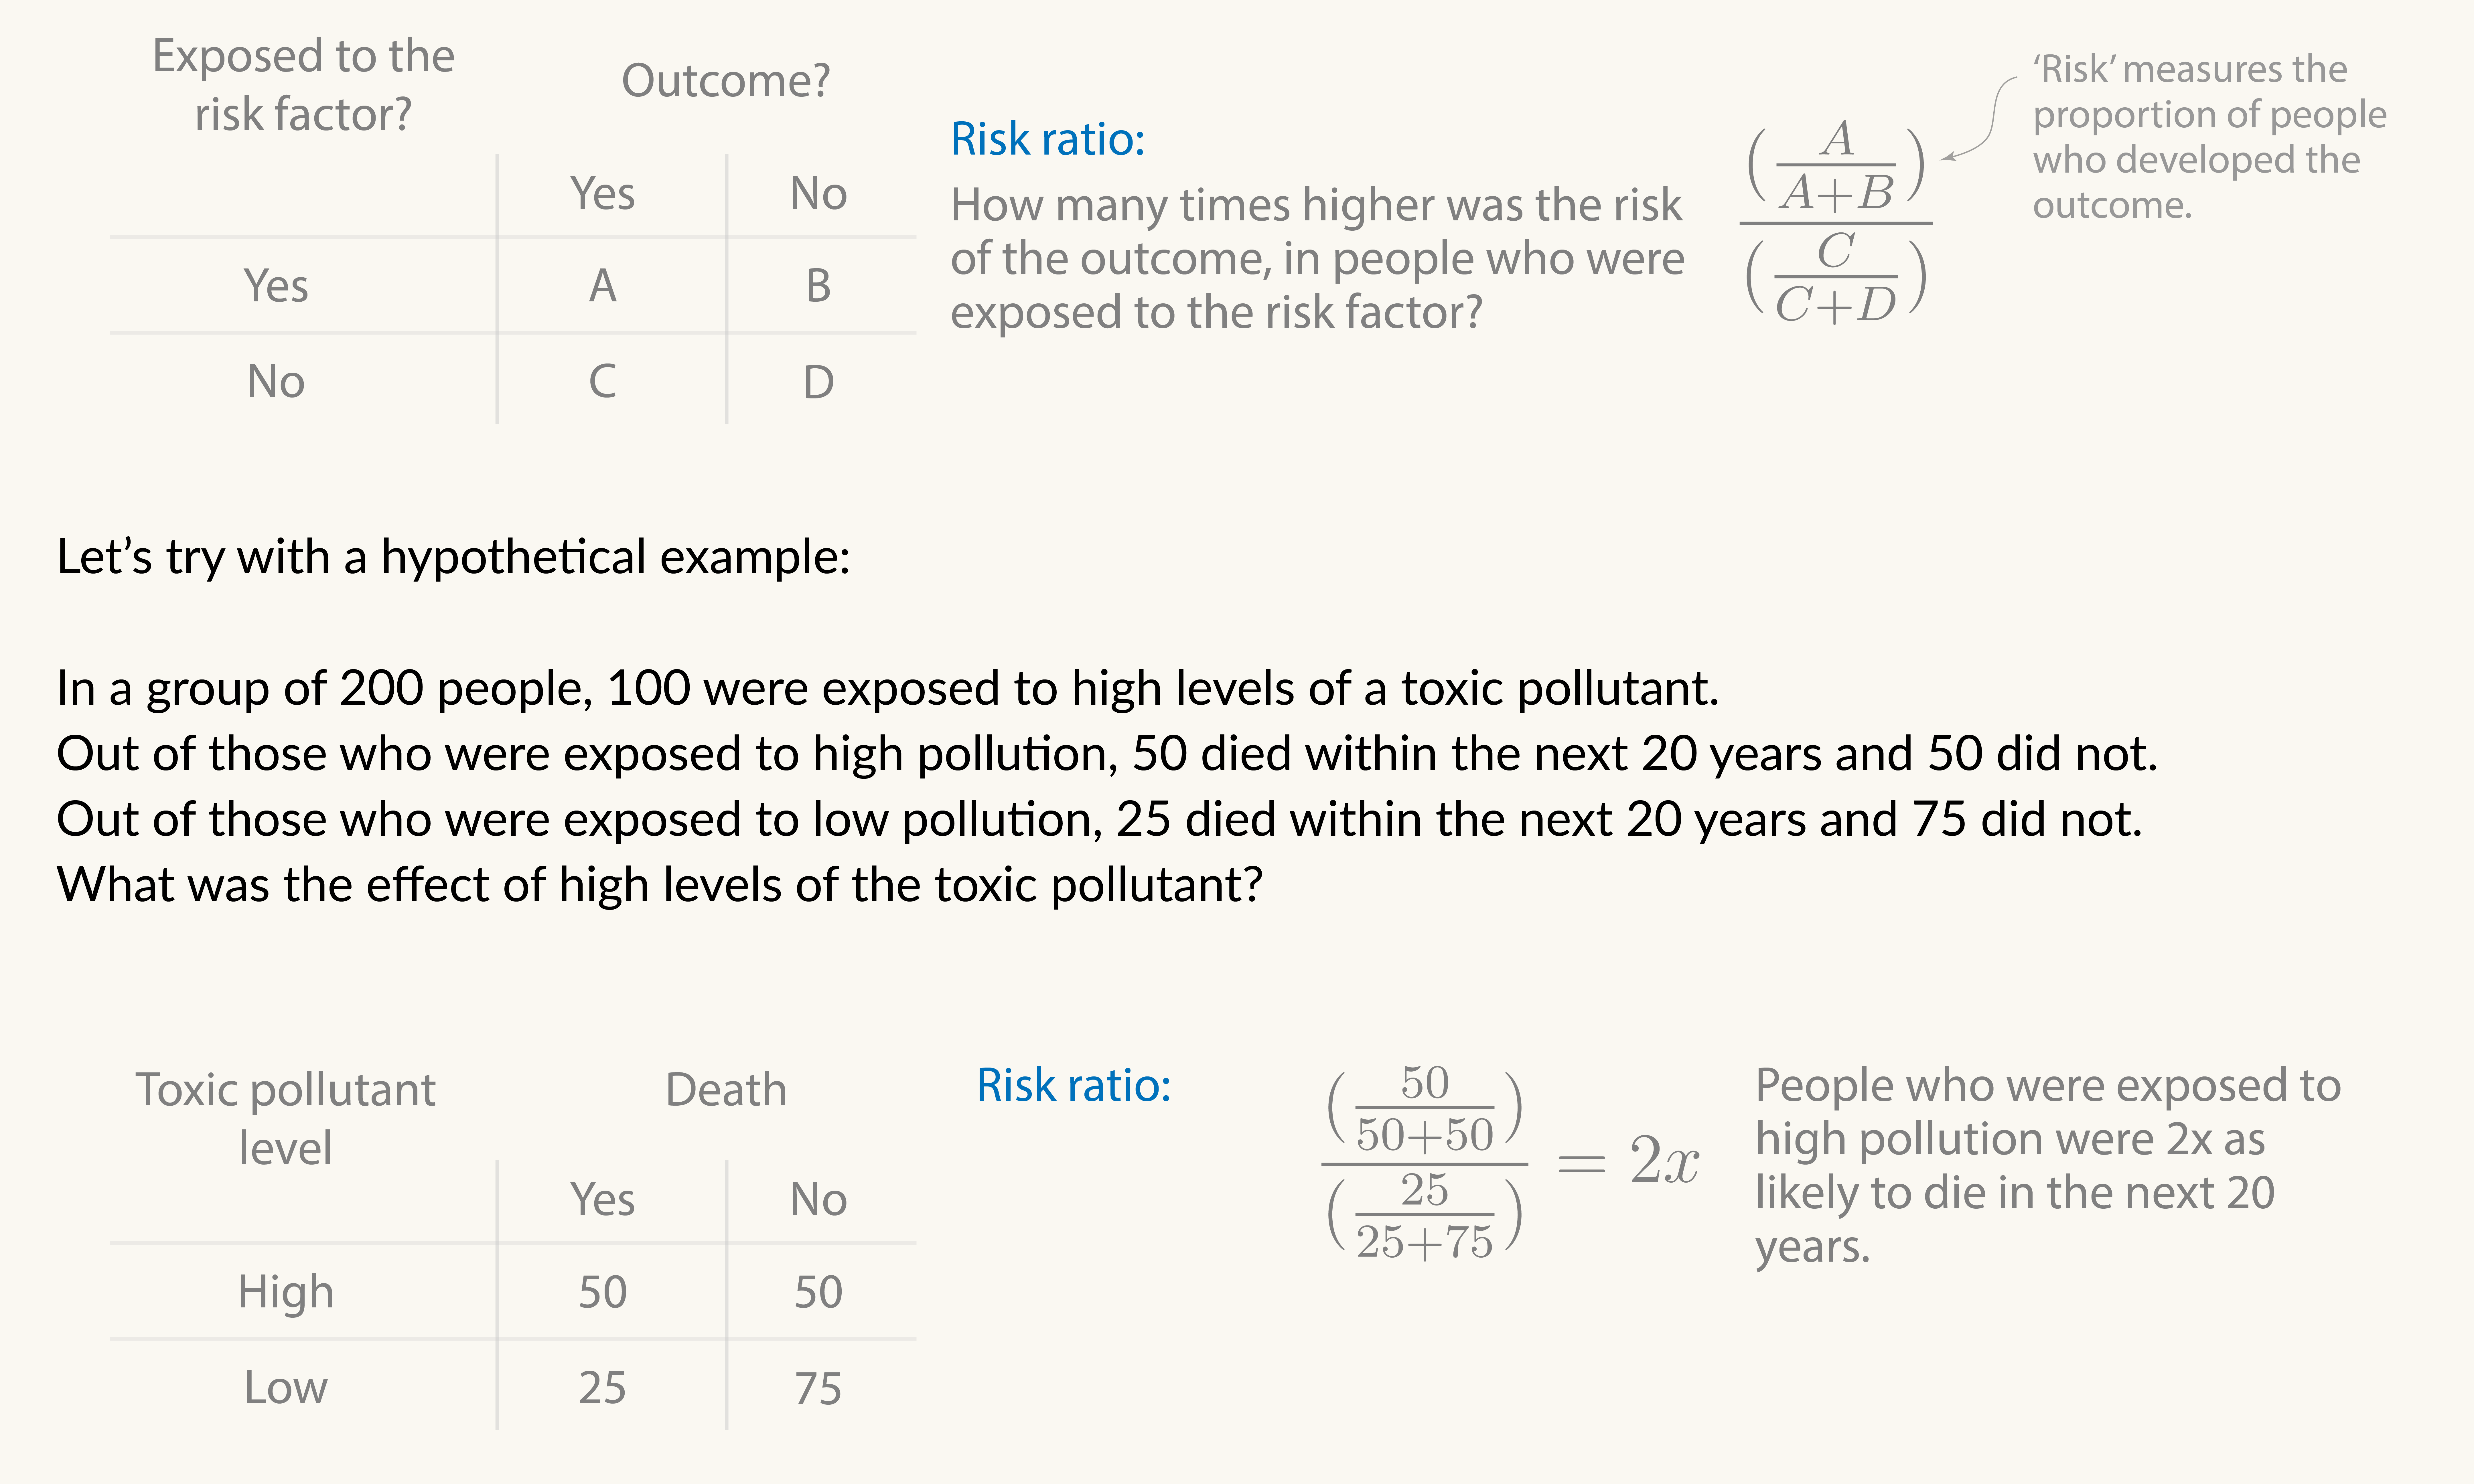 How to calculate the risk ratio, with a hypothetical example